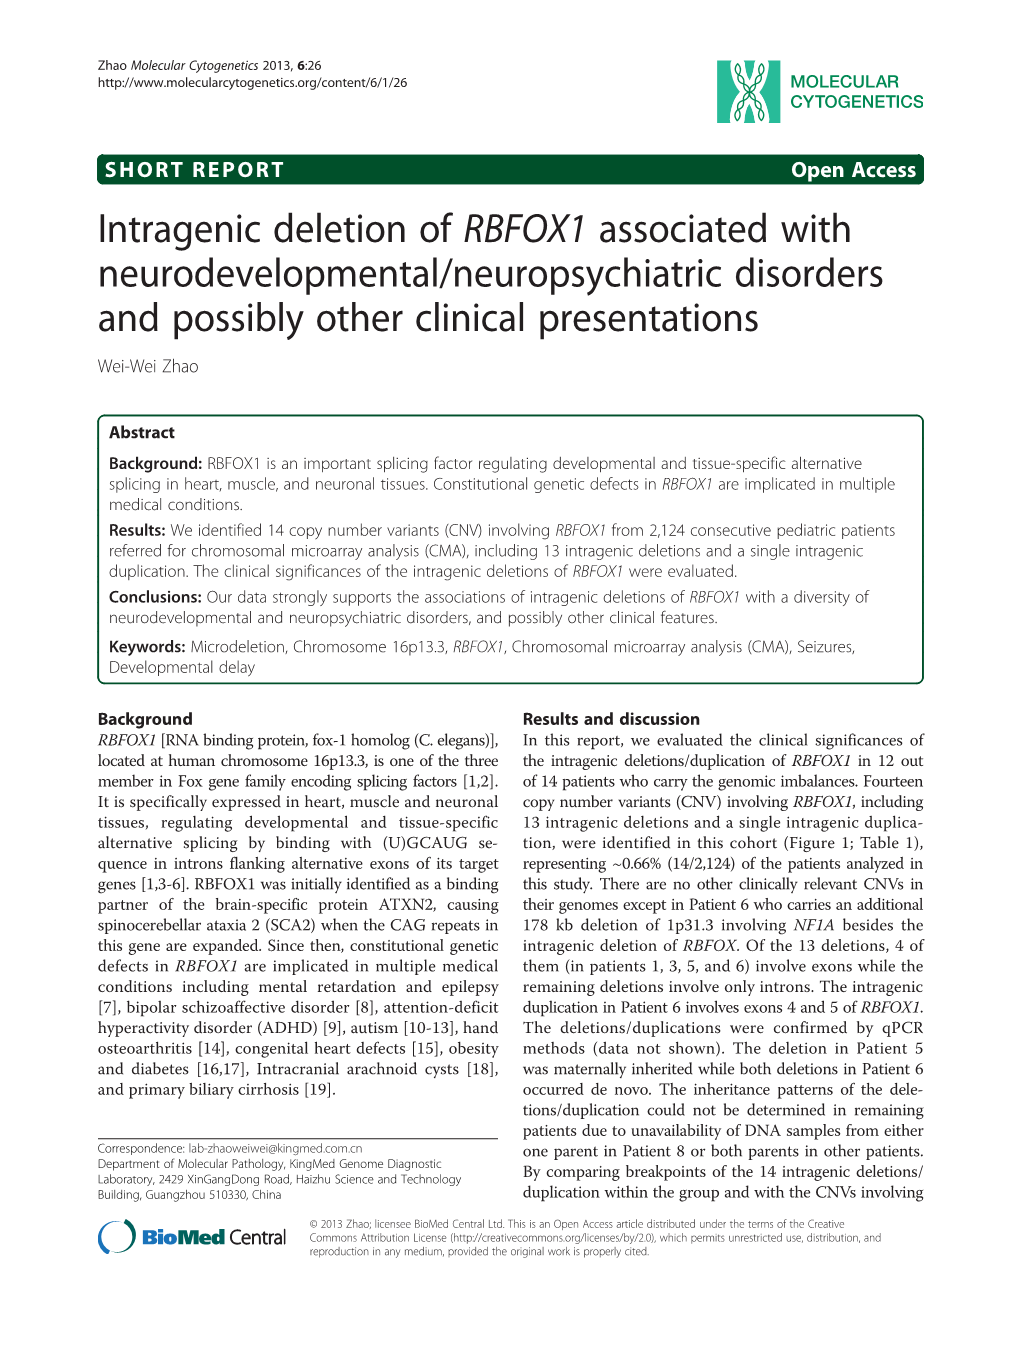 Intragenic Deletion of RBFOX1 Associated with Neurodevelopmental/Neuropsychiatric Disorders and Possibly Other Clinical Presentations Wei-Wei Zhao